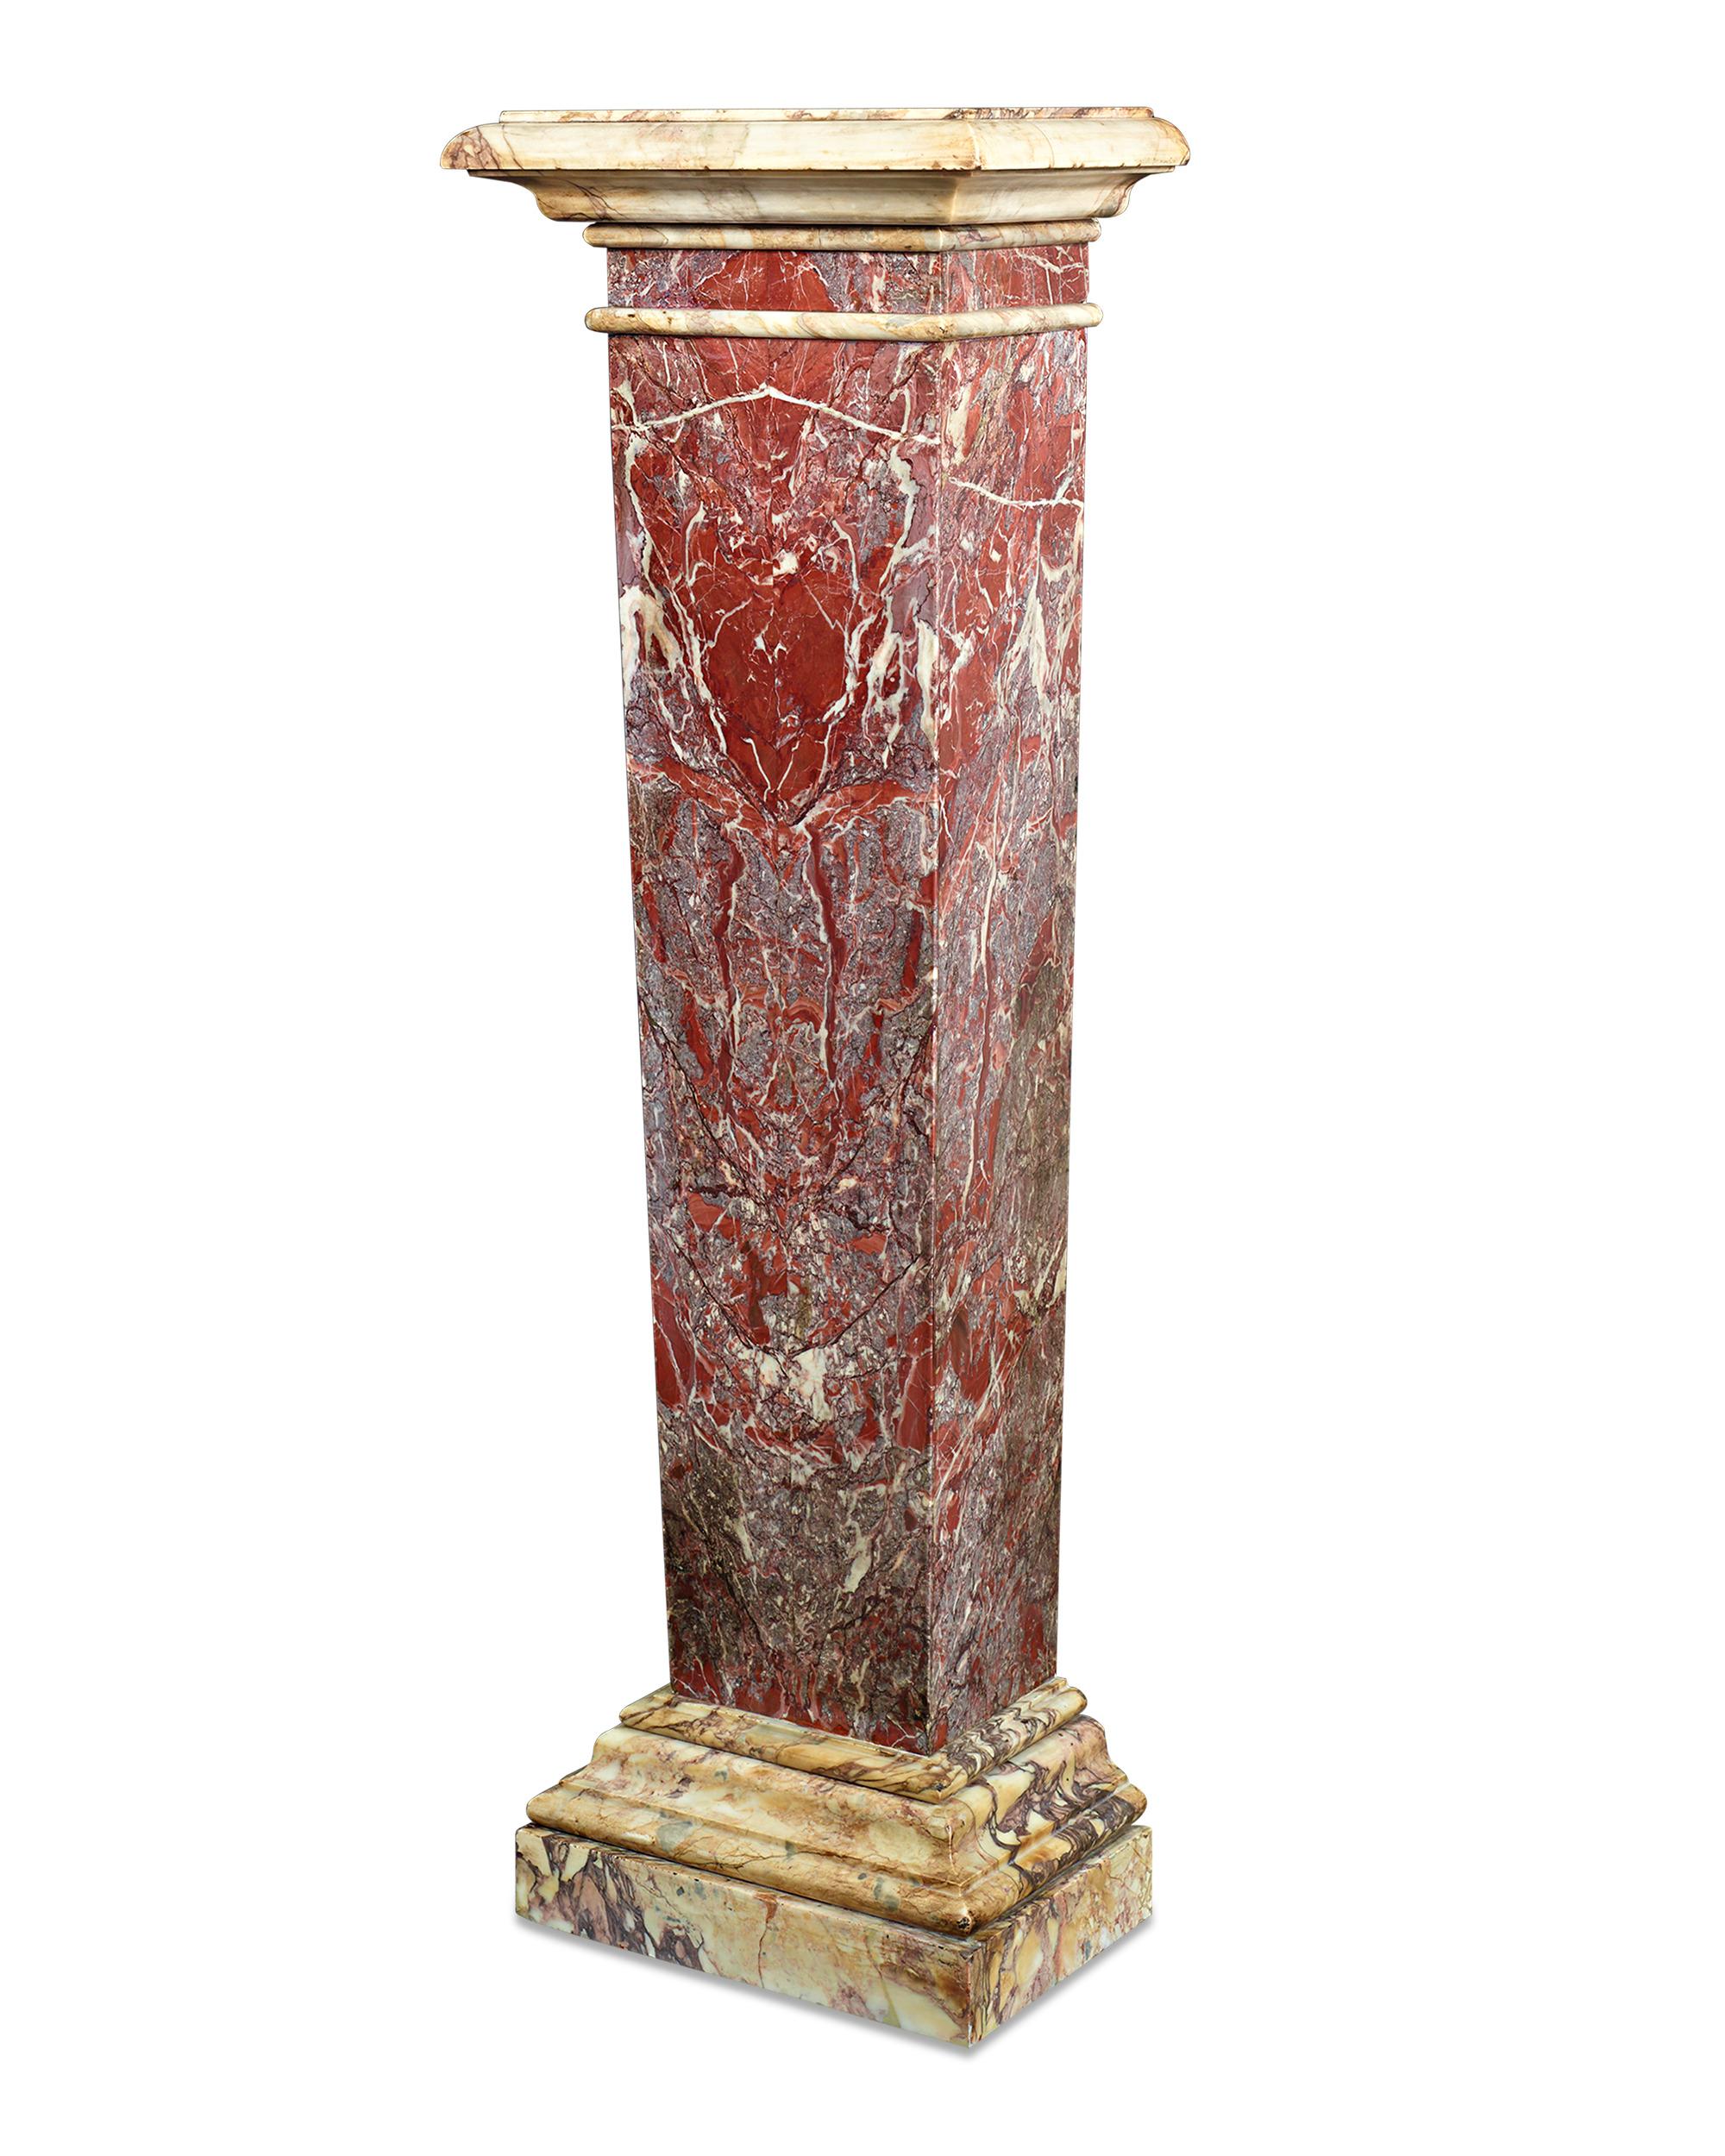 This elegant Italian pedestal is hewn from a striking piece of Rouge de France marble. Quarried only in France, Rouge de France marble has been hotly sought-after since ancient times for the highly varied, vibrant colors and patterns that naturally